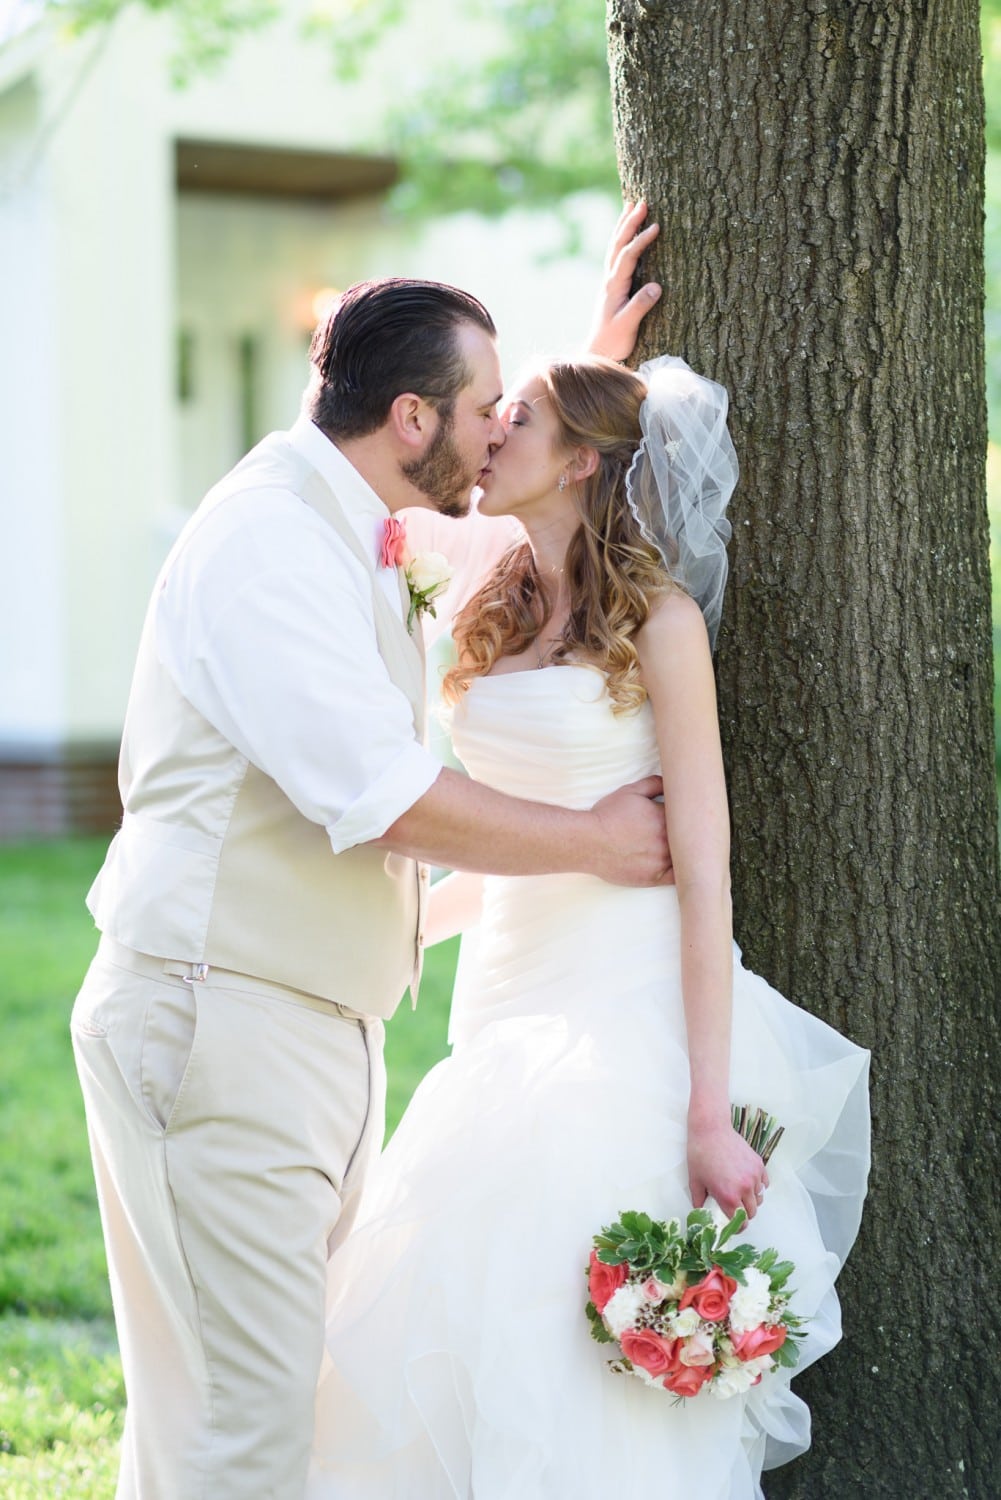 Just married couple kissing by a tree - Wildberry Farm